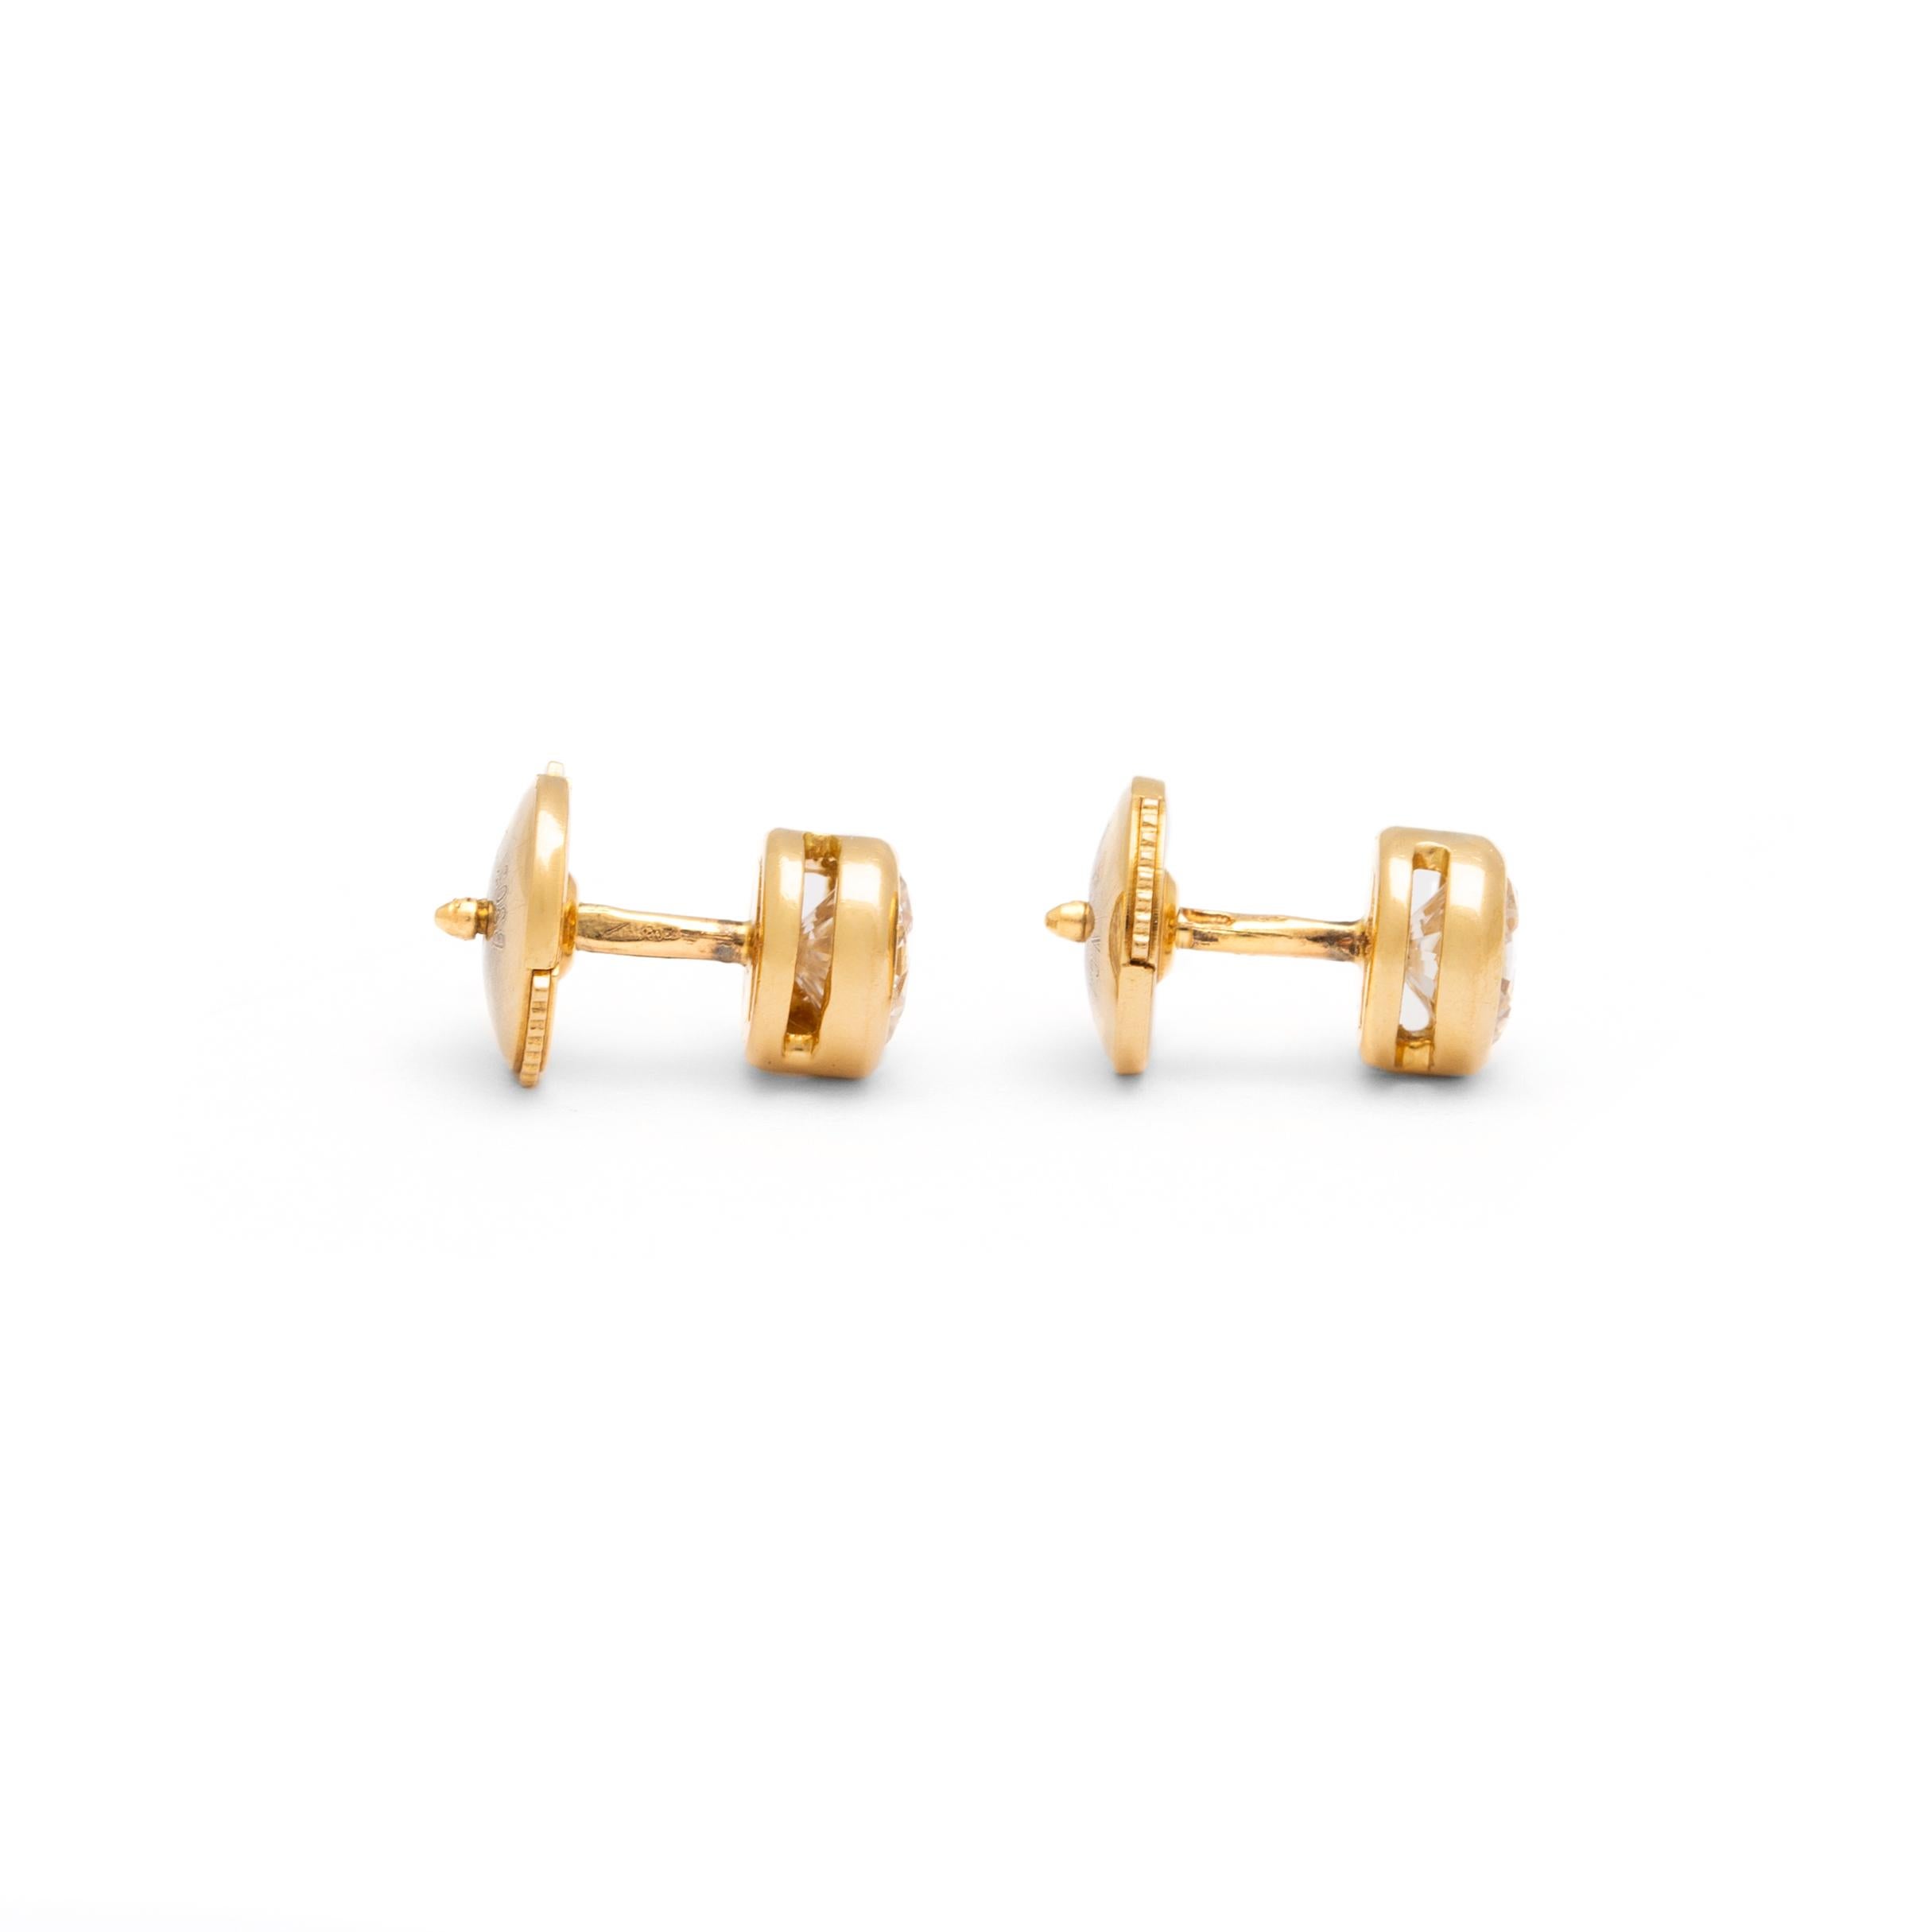 Pair of diamond yellow gold 18K Earstuds.
Each diamond weights approximately 0.50 carat. 
Signed Van Cleef and Arpels.
Numbered Vca B3051 Z1. French marks.
Original Van Cleef and Arpels pouch.
Purchased from the Van Cleef and Arpels Boutique in